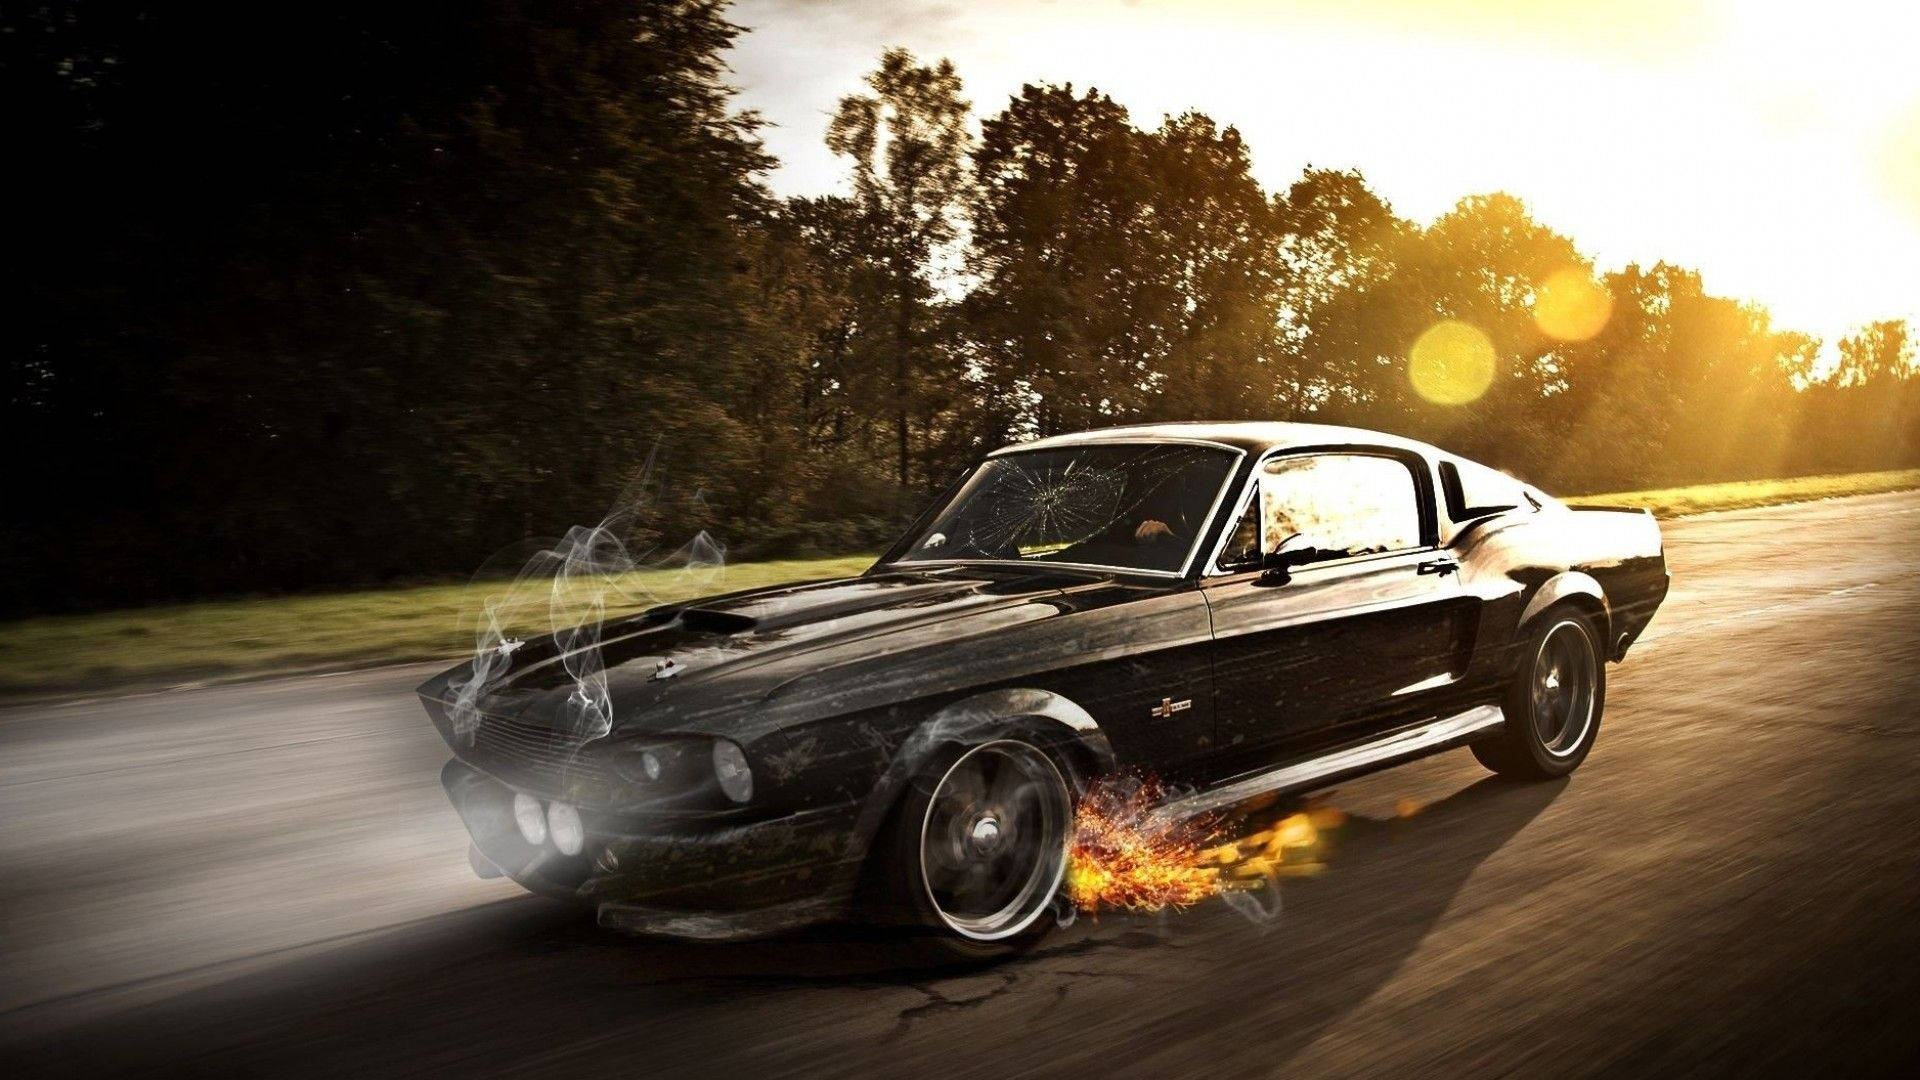 Muscle Car Tires On Fire Wallpaper